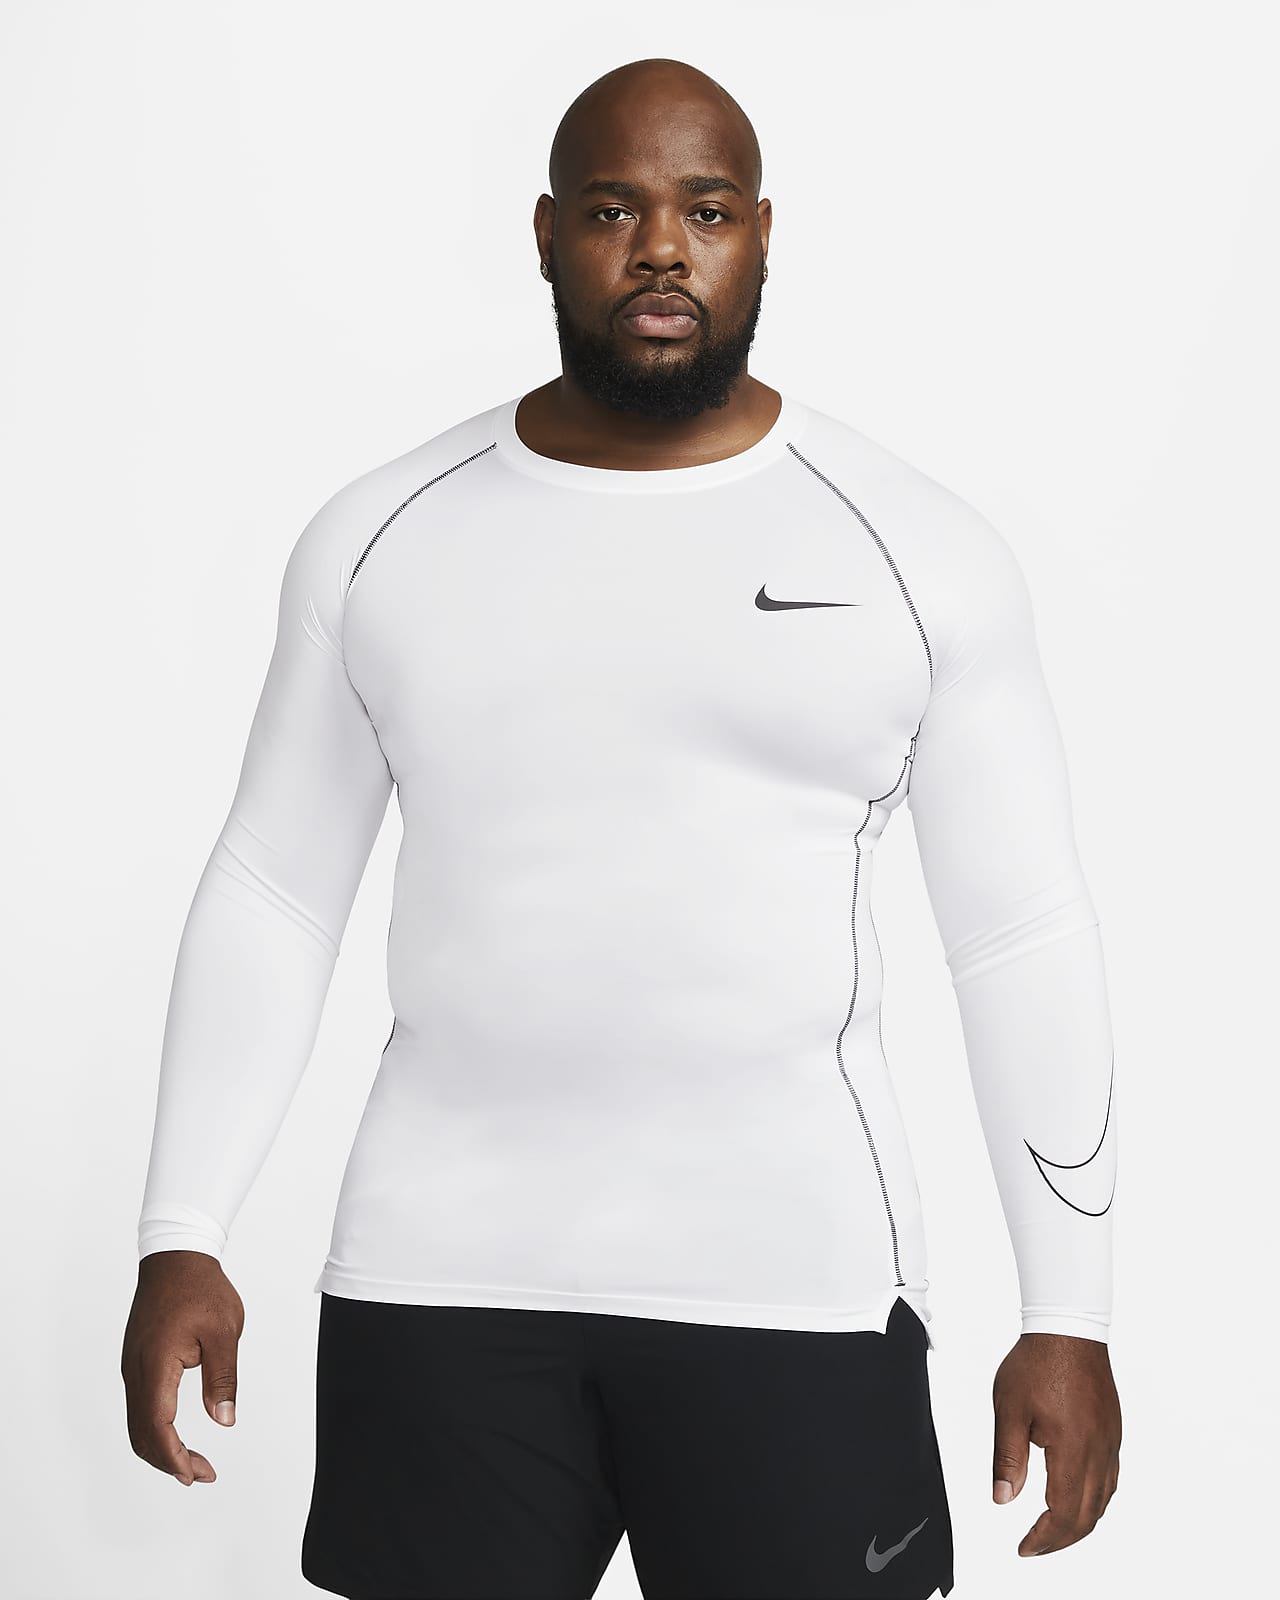 Nike Men's Pro Long Sleeve Compression Top 